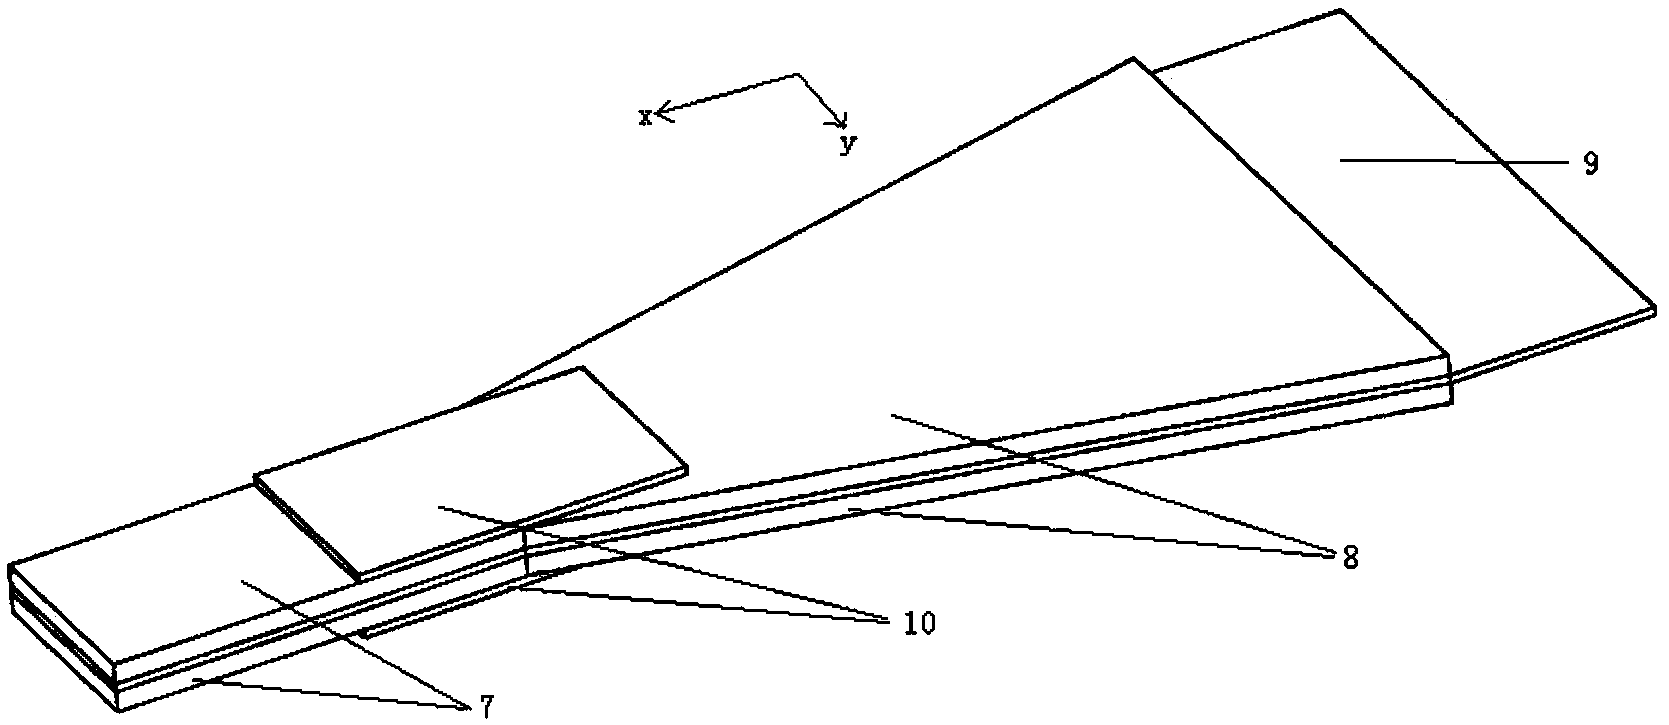 Double piezoelectric actuators type micro flapping wing aircraft based on soft hinges